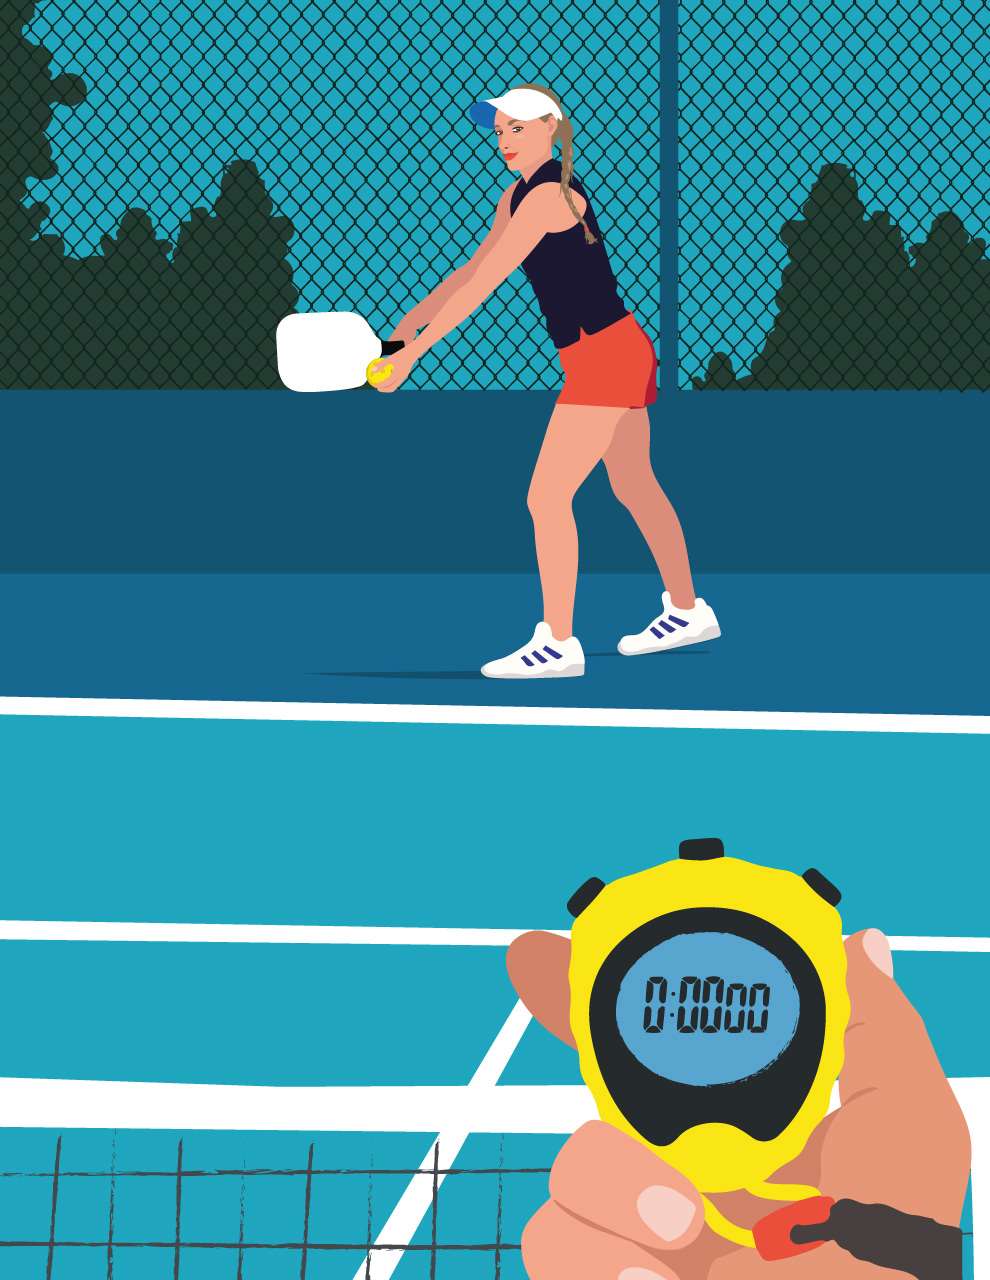 Camila Pinheiro, Flat vector illustration of a woman playing tennis and someone holing a stopwatch in the corner. Summer vibes.  